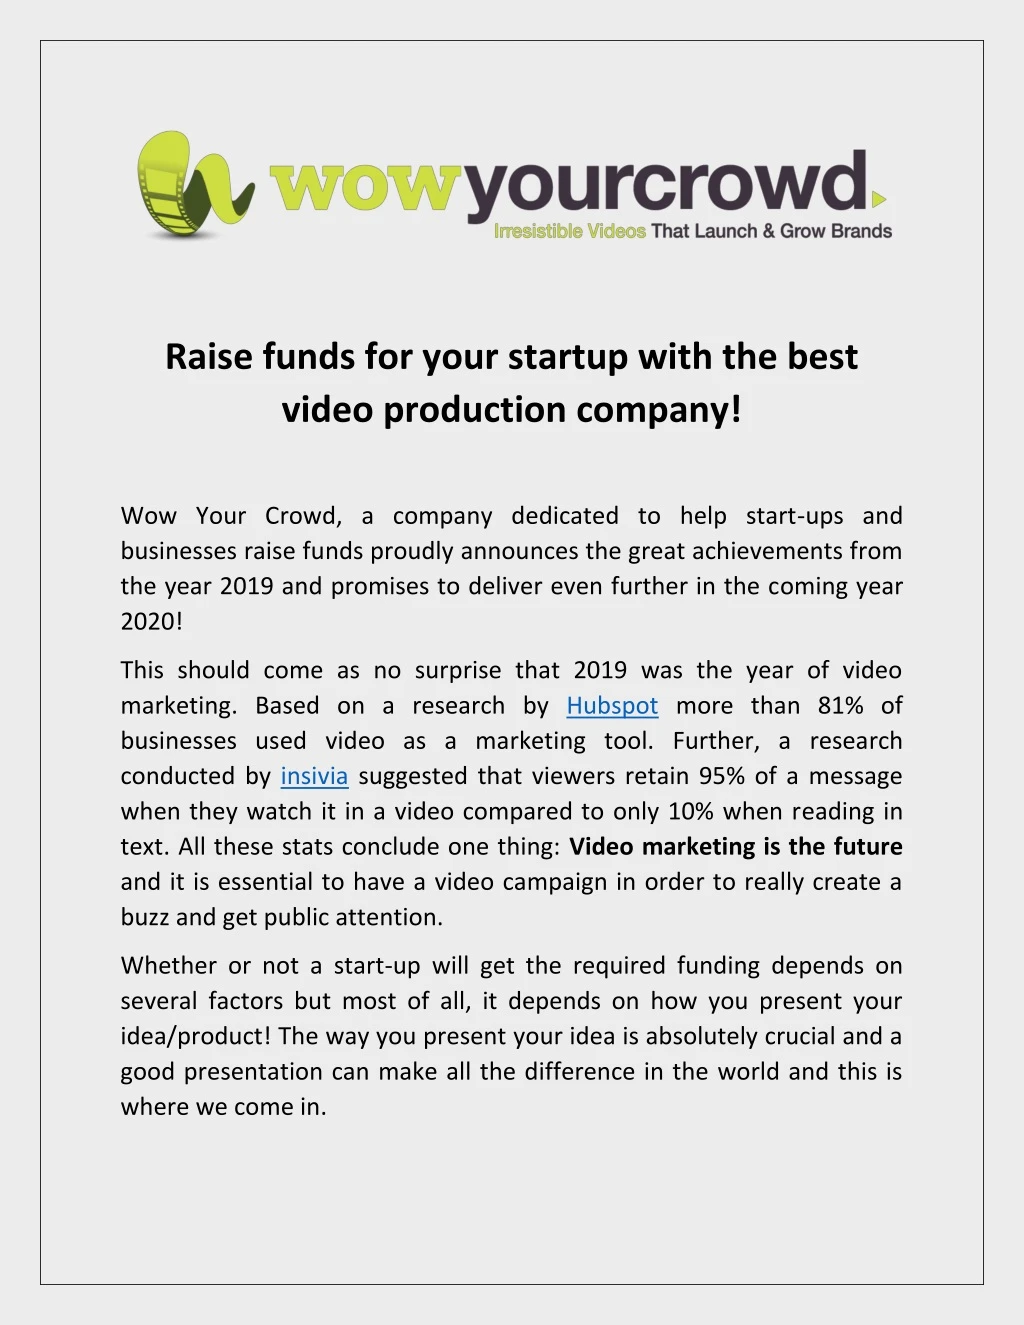 raise funds for your startup with the best video